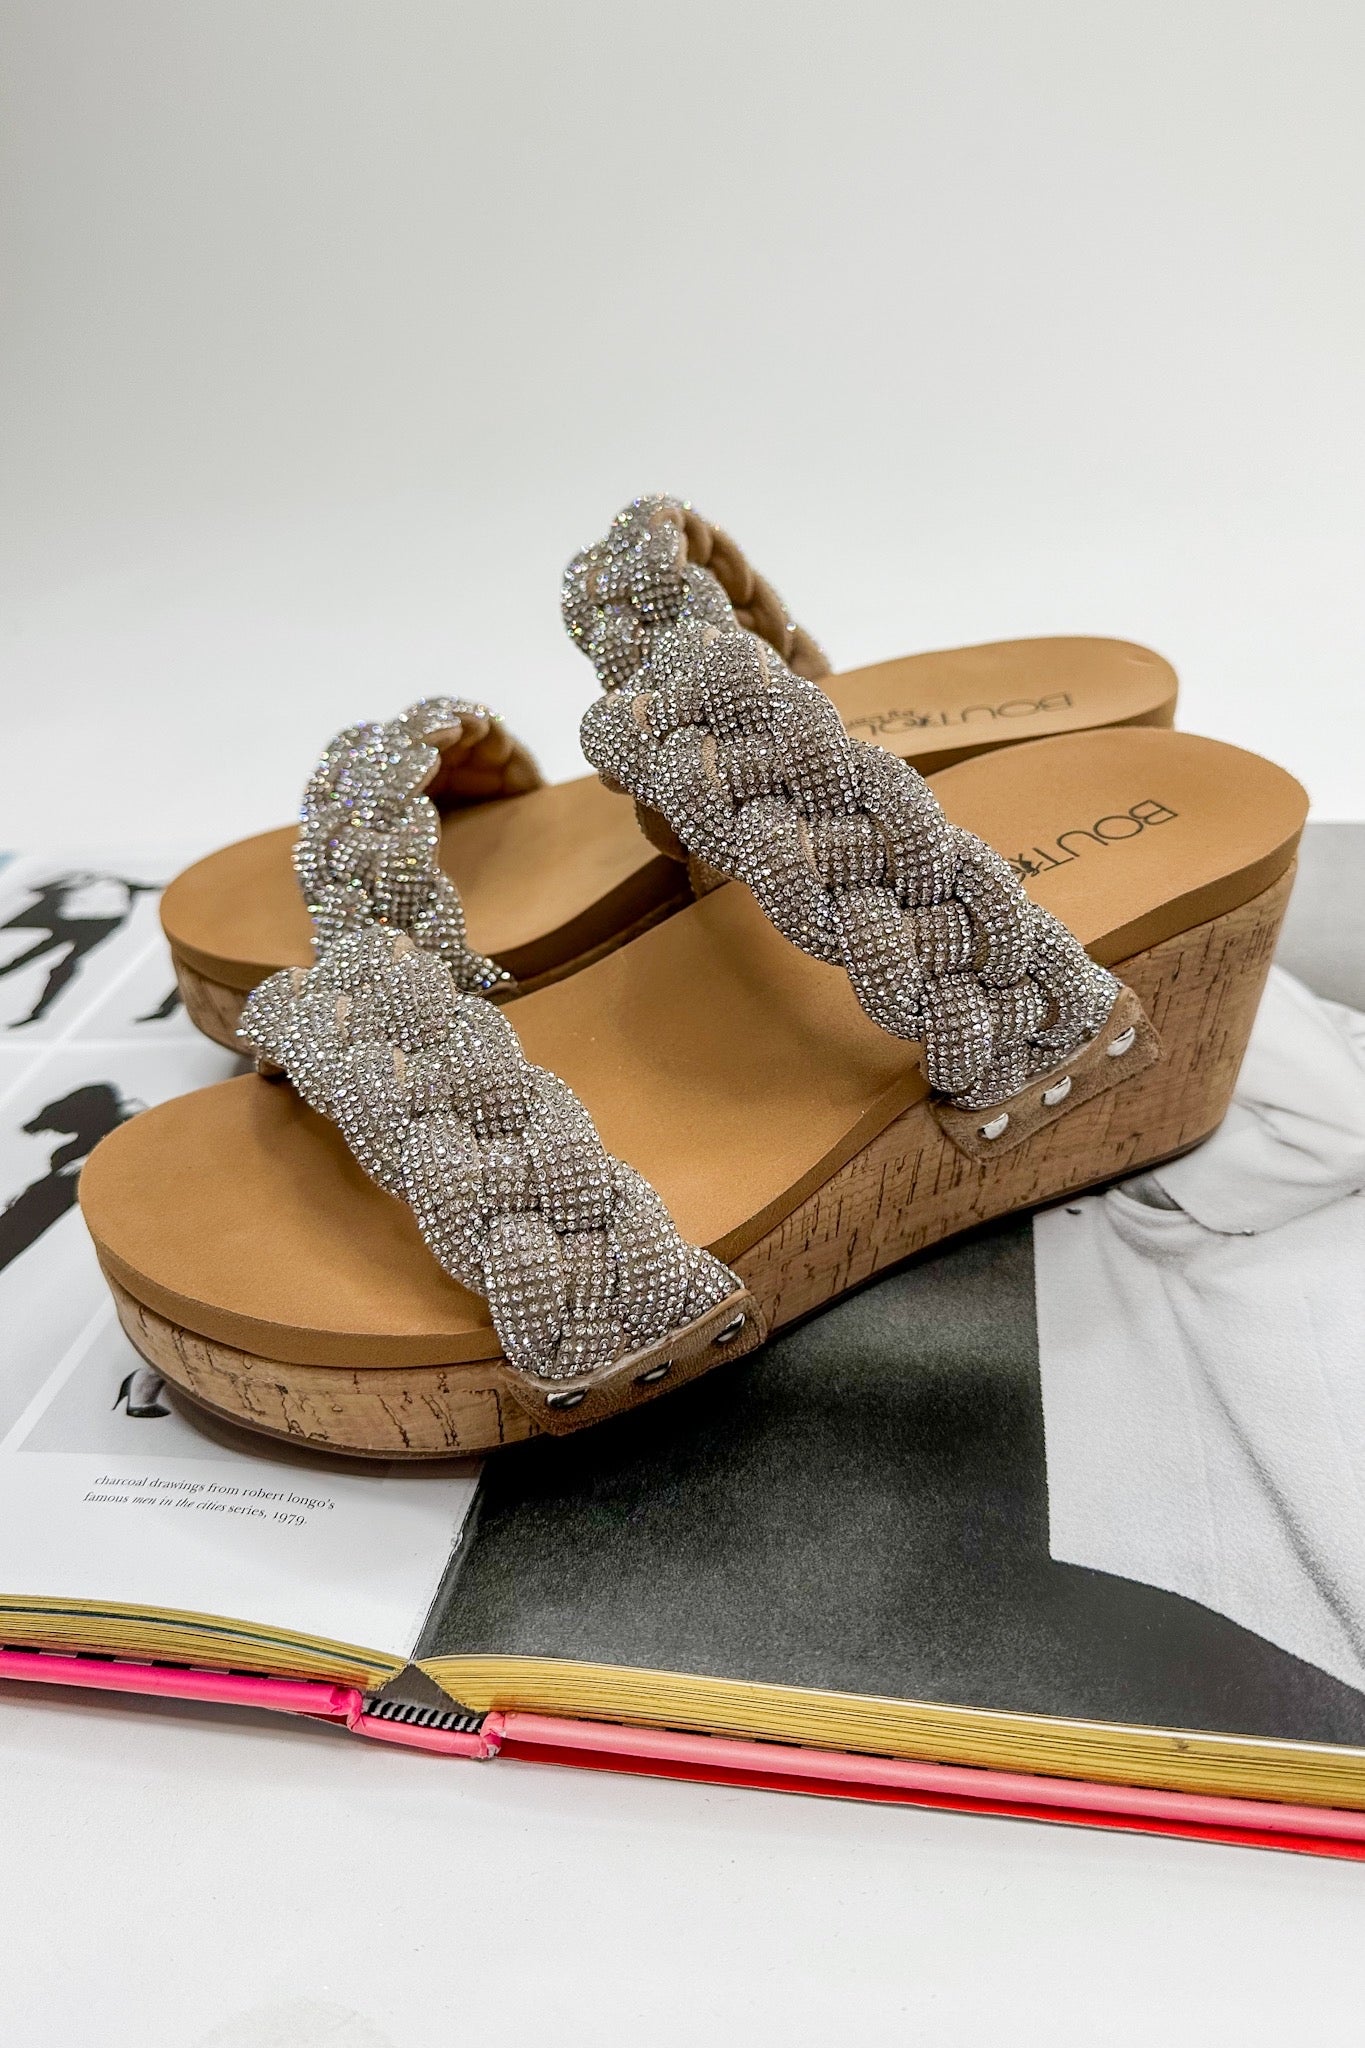 The Mystique Braided Clear Rhinestone Wedges by Corkys